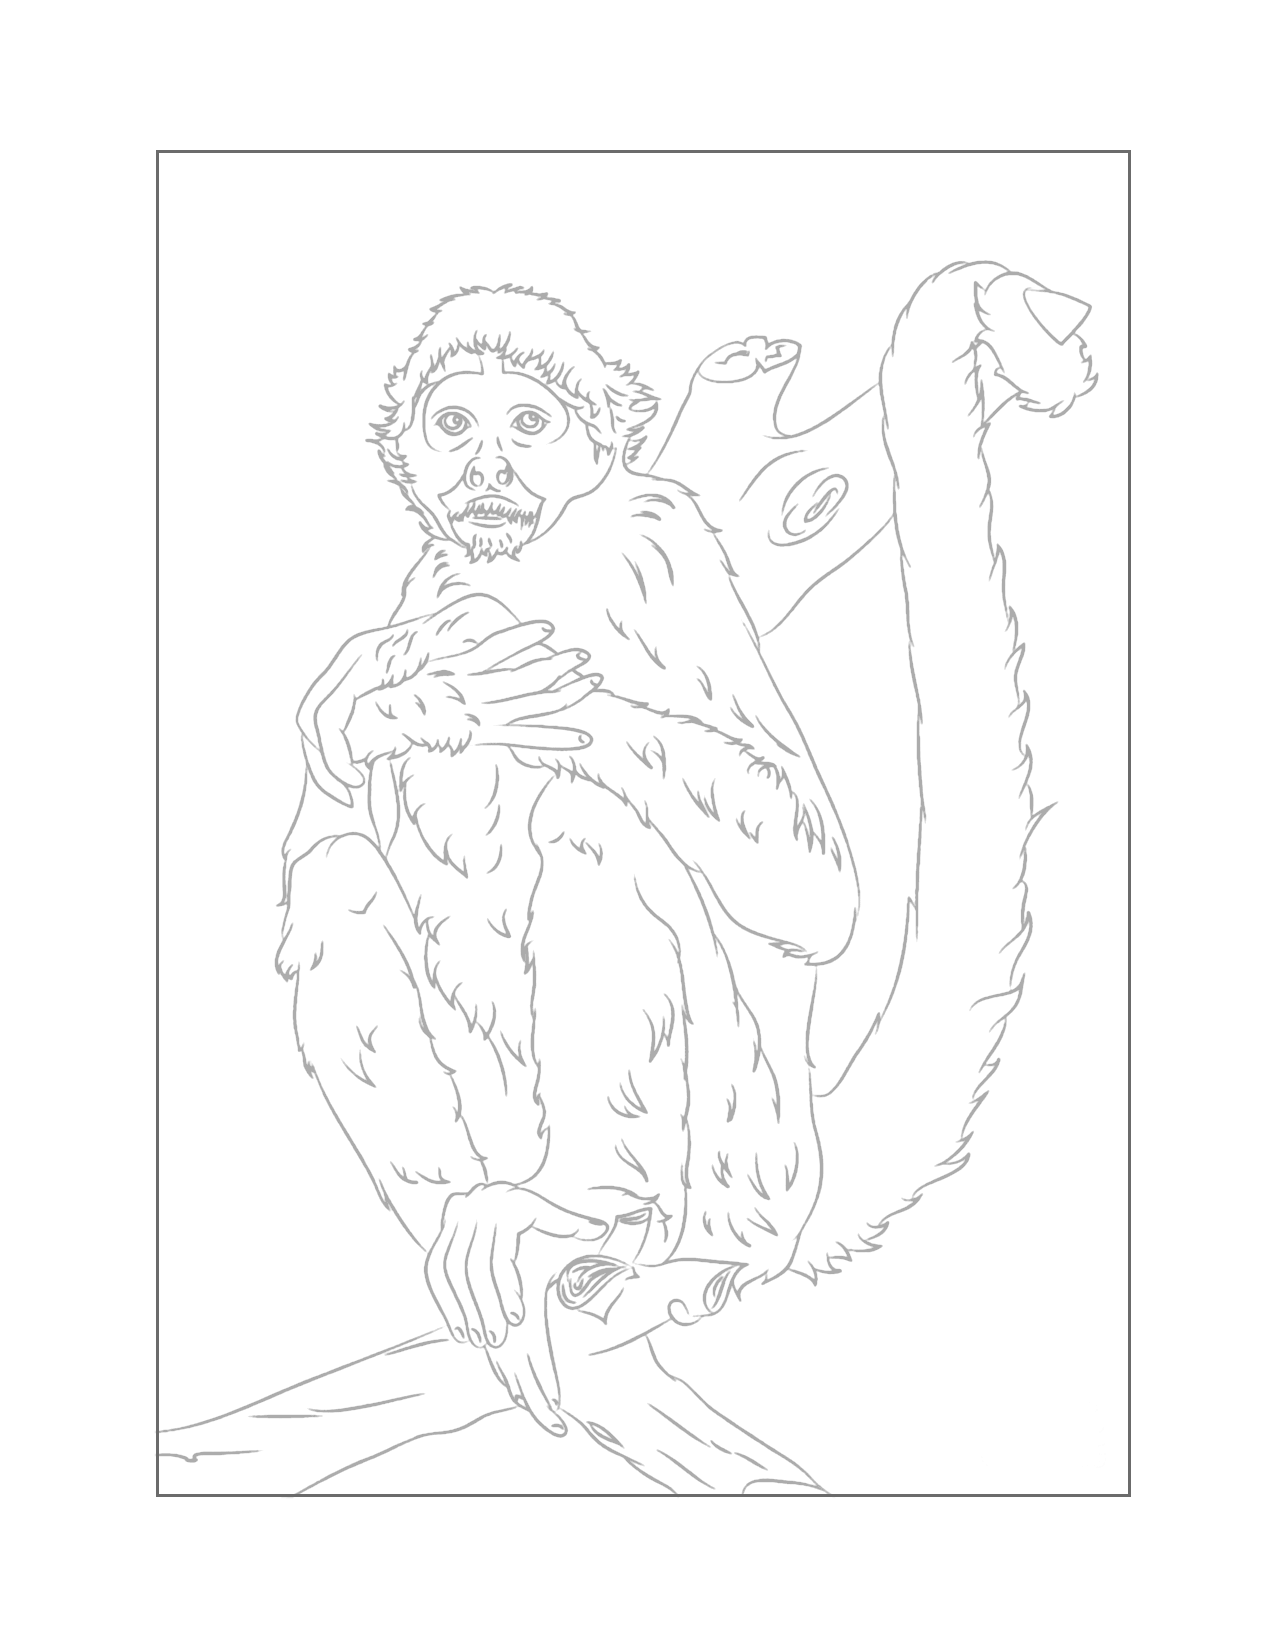 Traceable Monkey Coloring Page